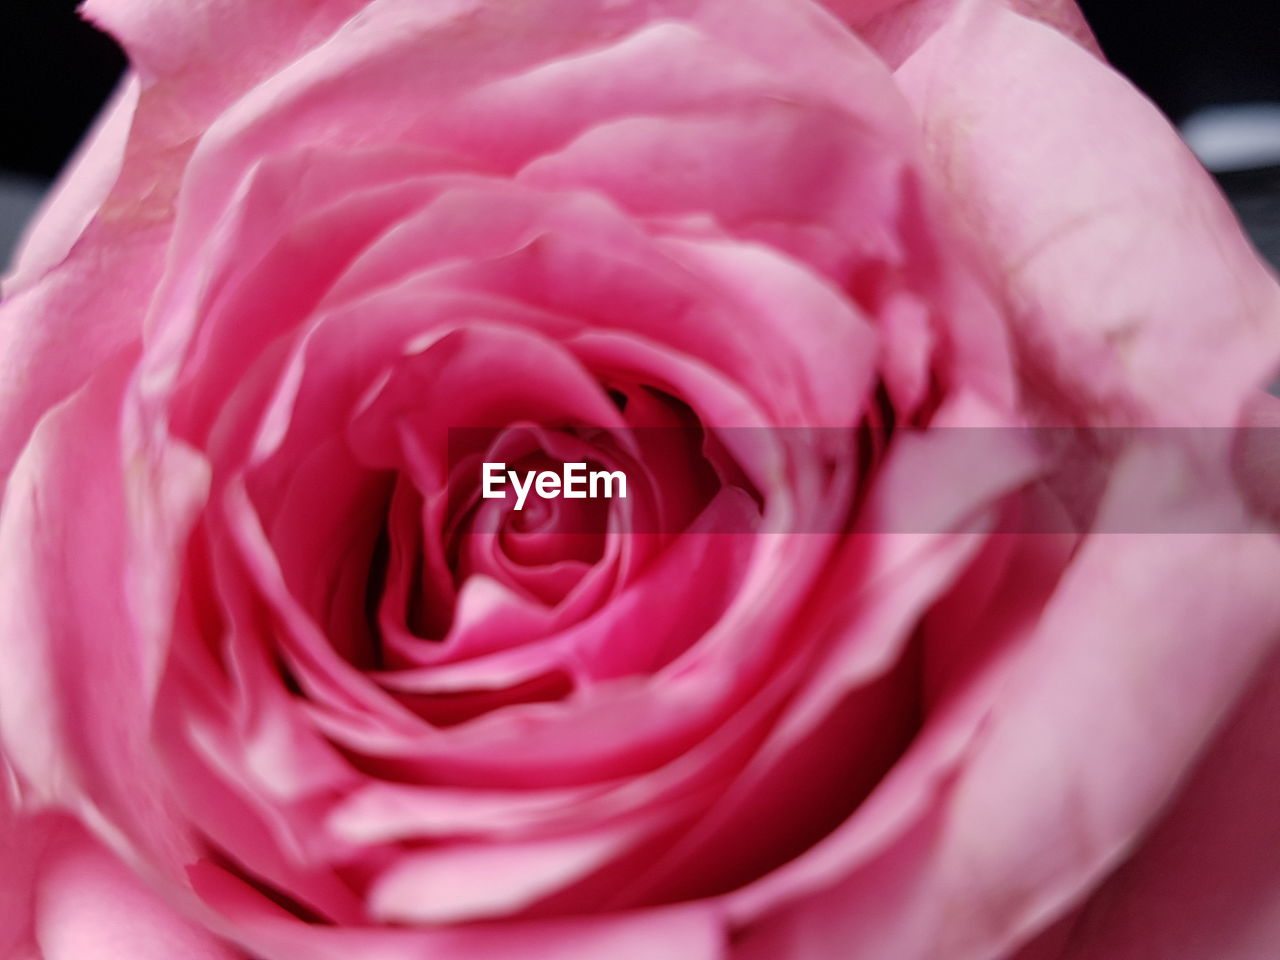 EXTREME CLOSE-UP OF PINK ROSE